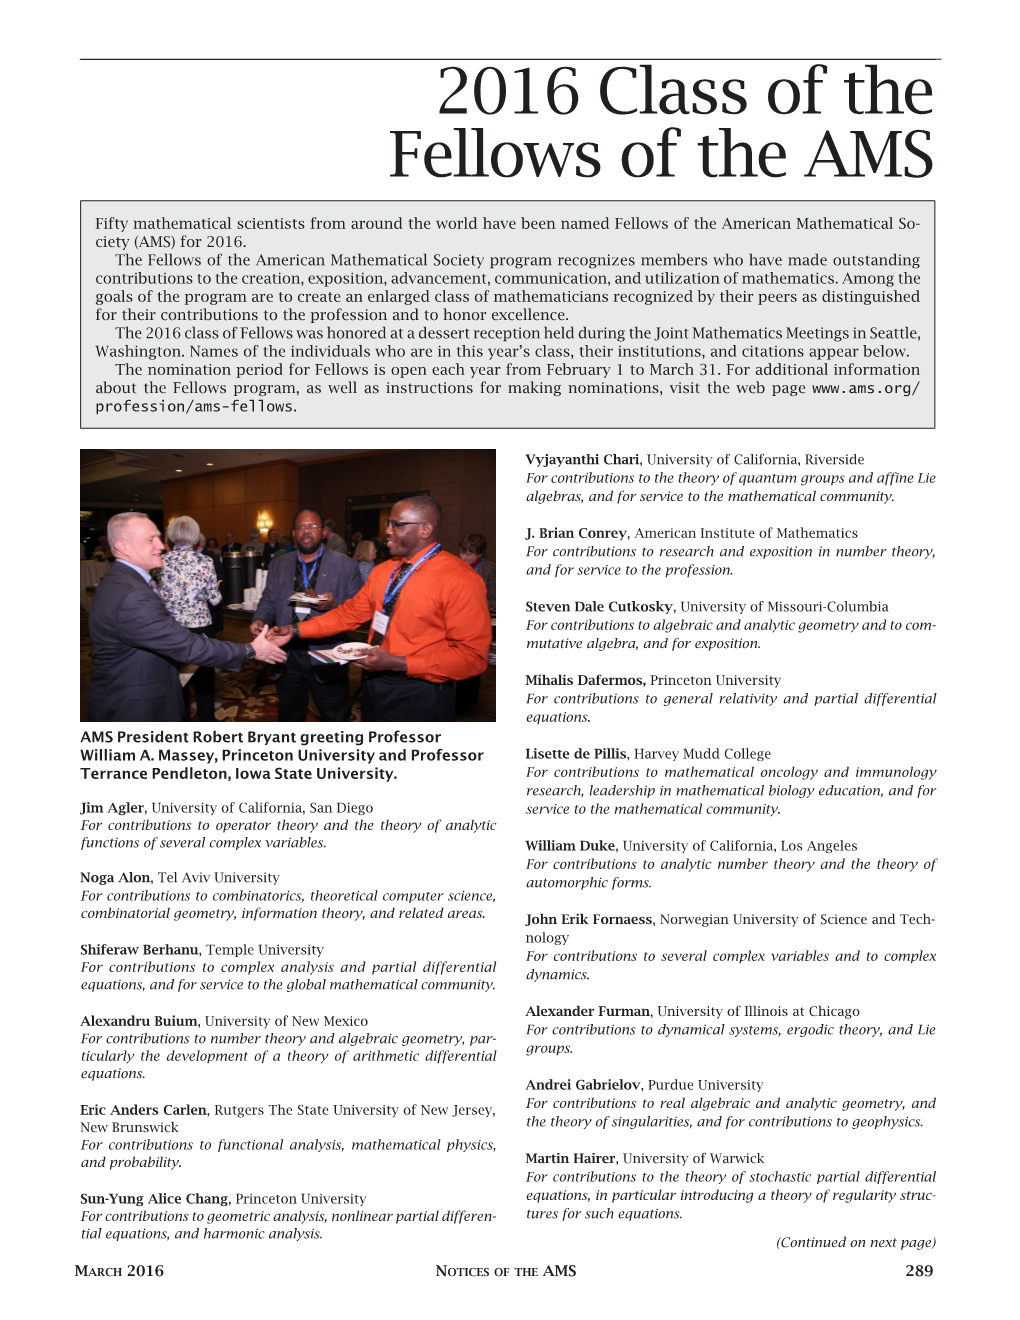 2016 Class of the Fellows of the AMS